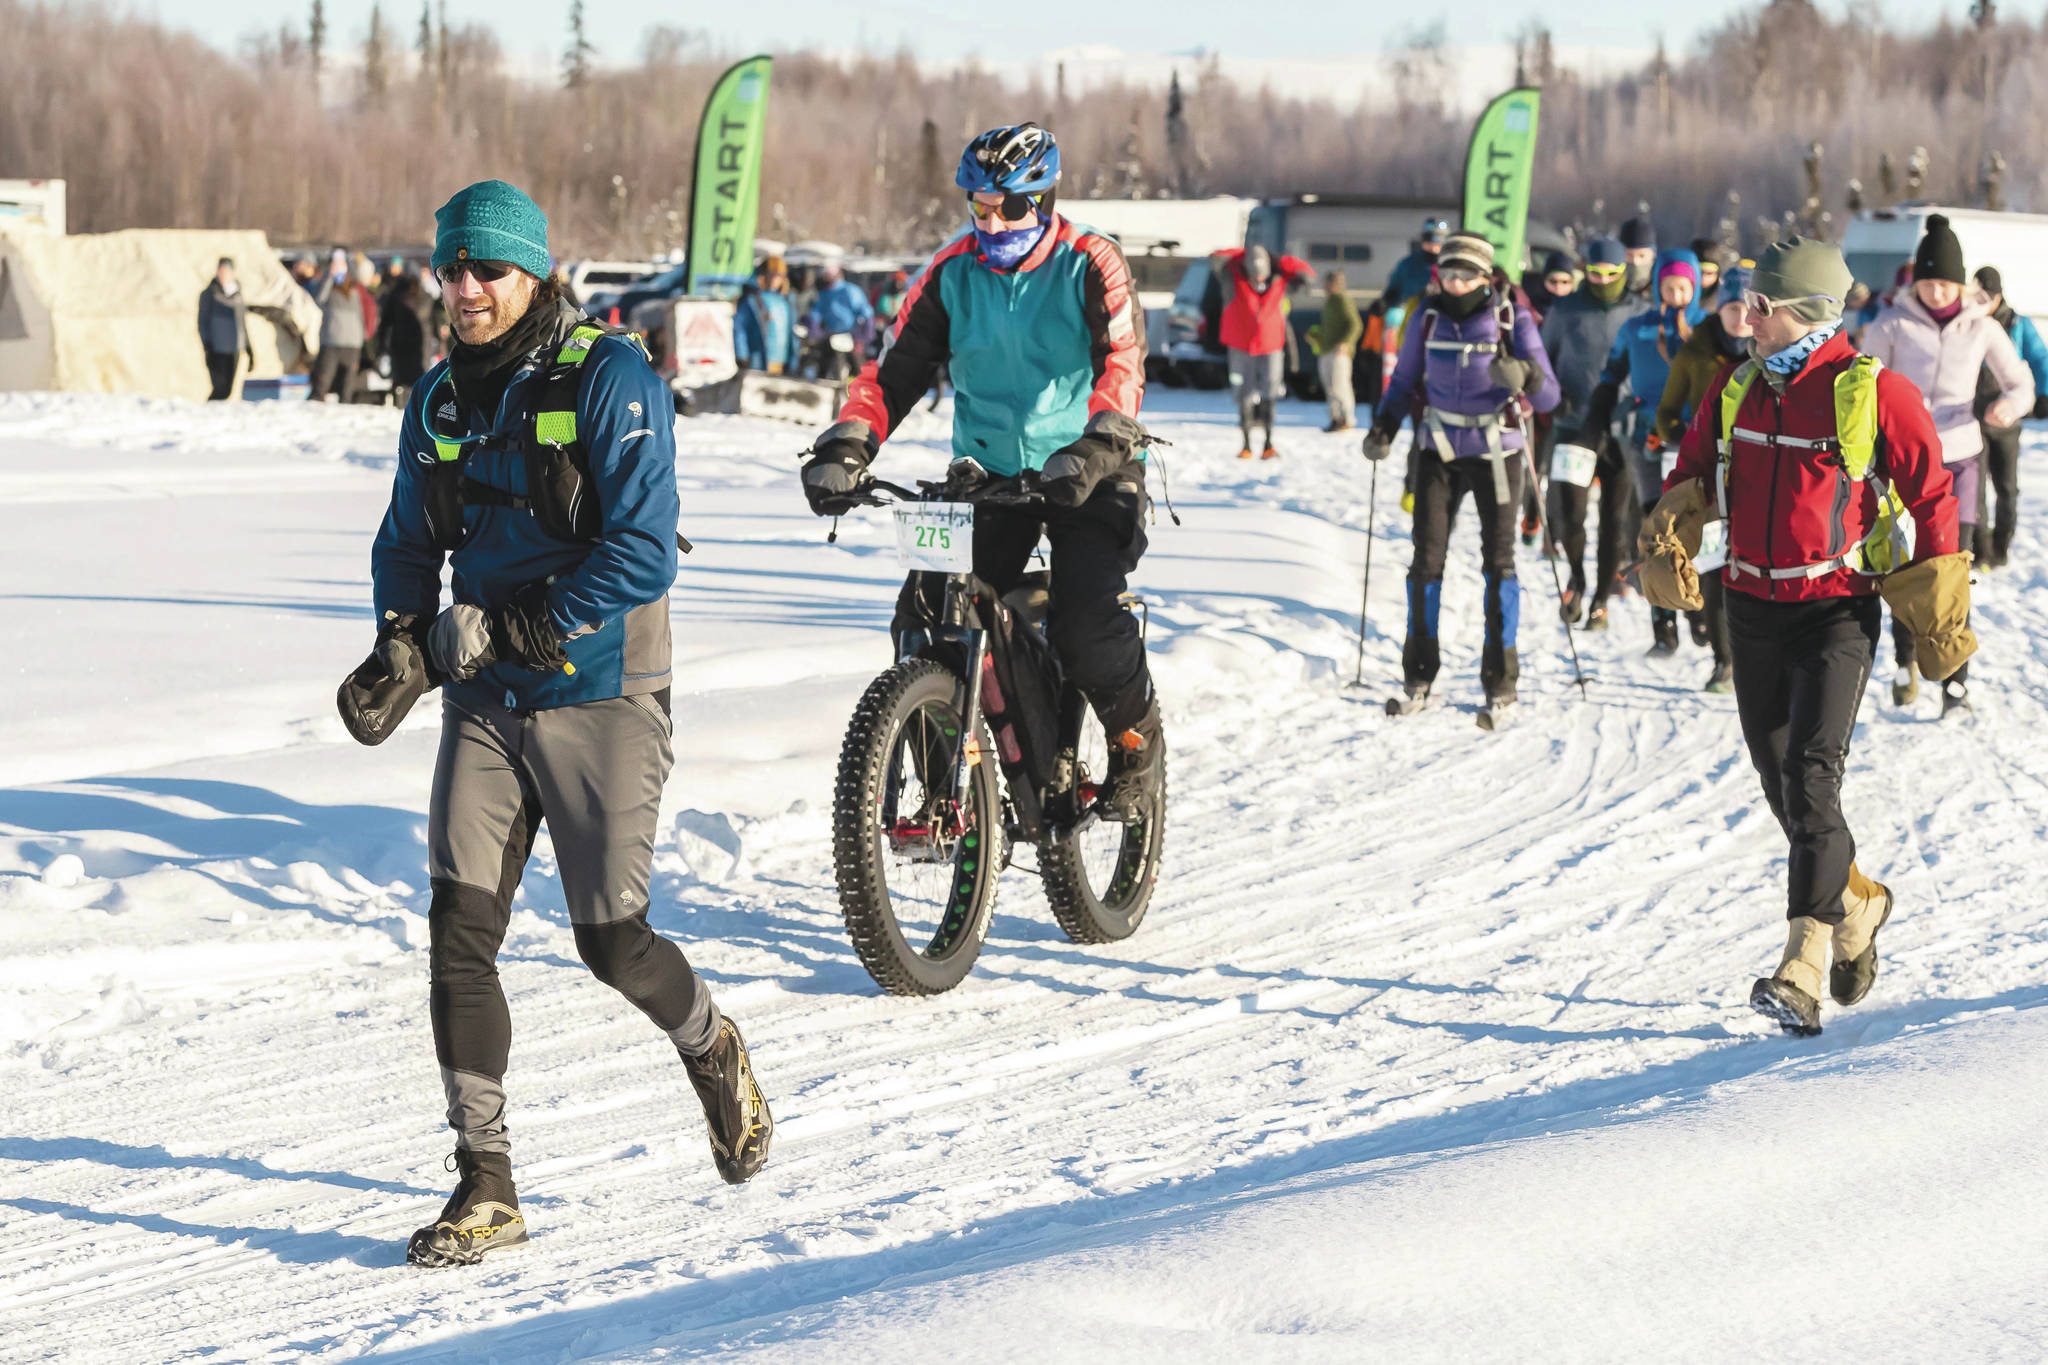 Photo by Andy Romang
Ben LaVigueur, 43, of Nikiski starts the Little Su 50K on Saturday in Big Lake. LaVigueur won the run category in the event.